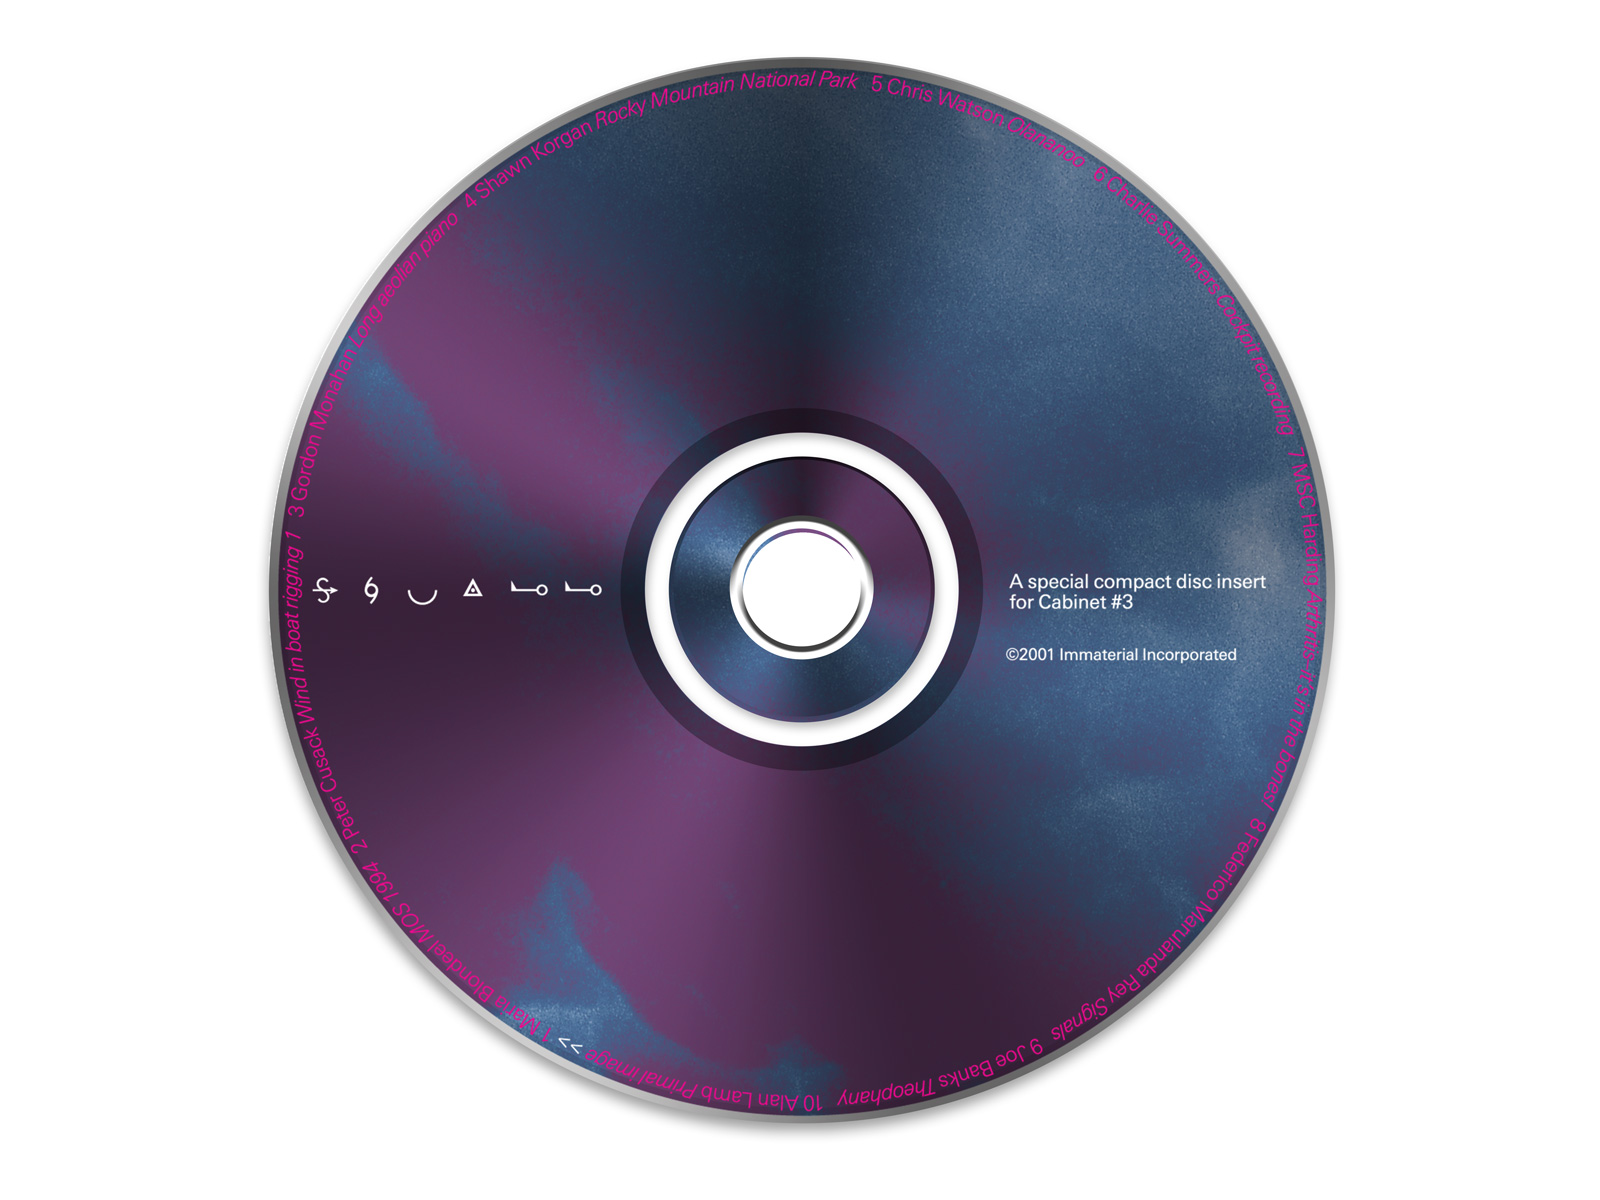 An image of the issue's CD insert “Squall.”